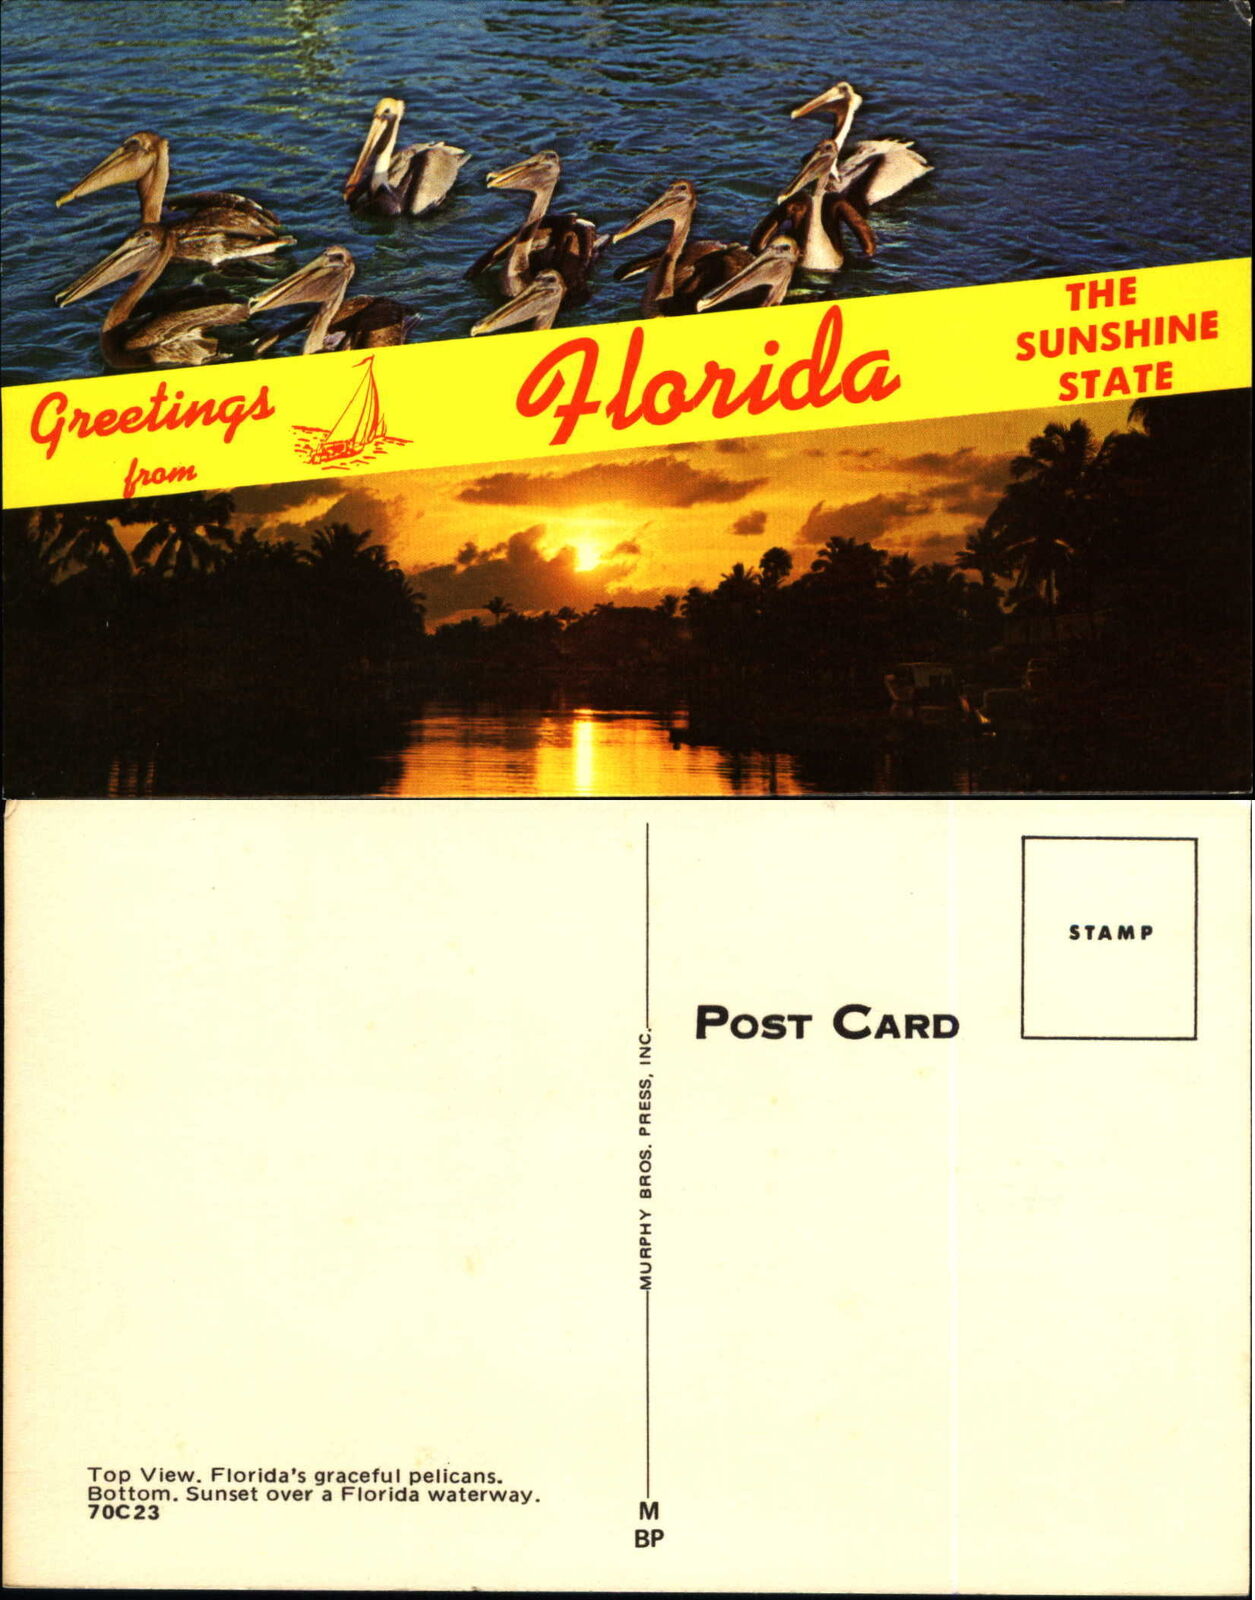 Greetings from Florida the Sunshine State pelicans birds sunset vintage postcard